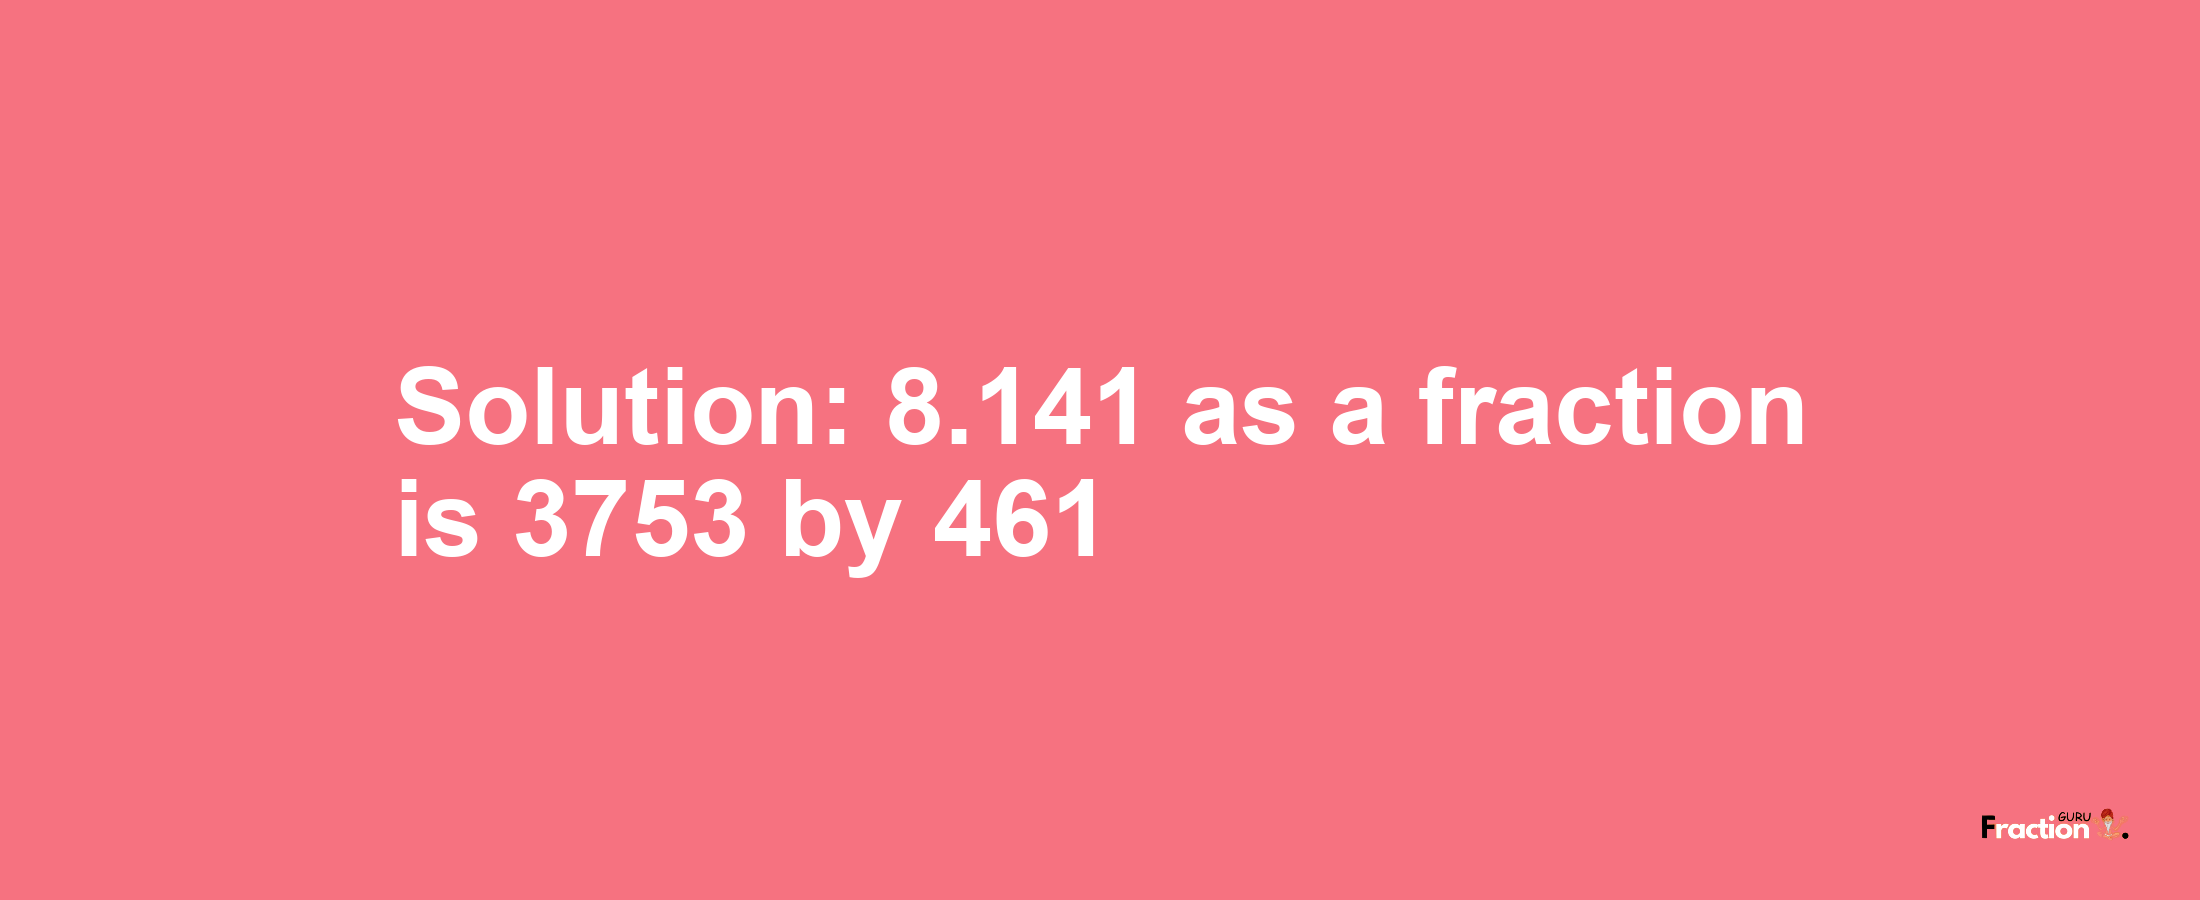 Solution:8.141 as a fraction is 3753/461